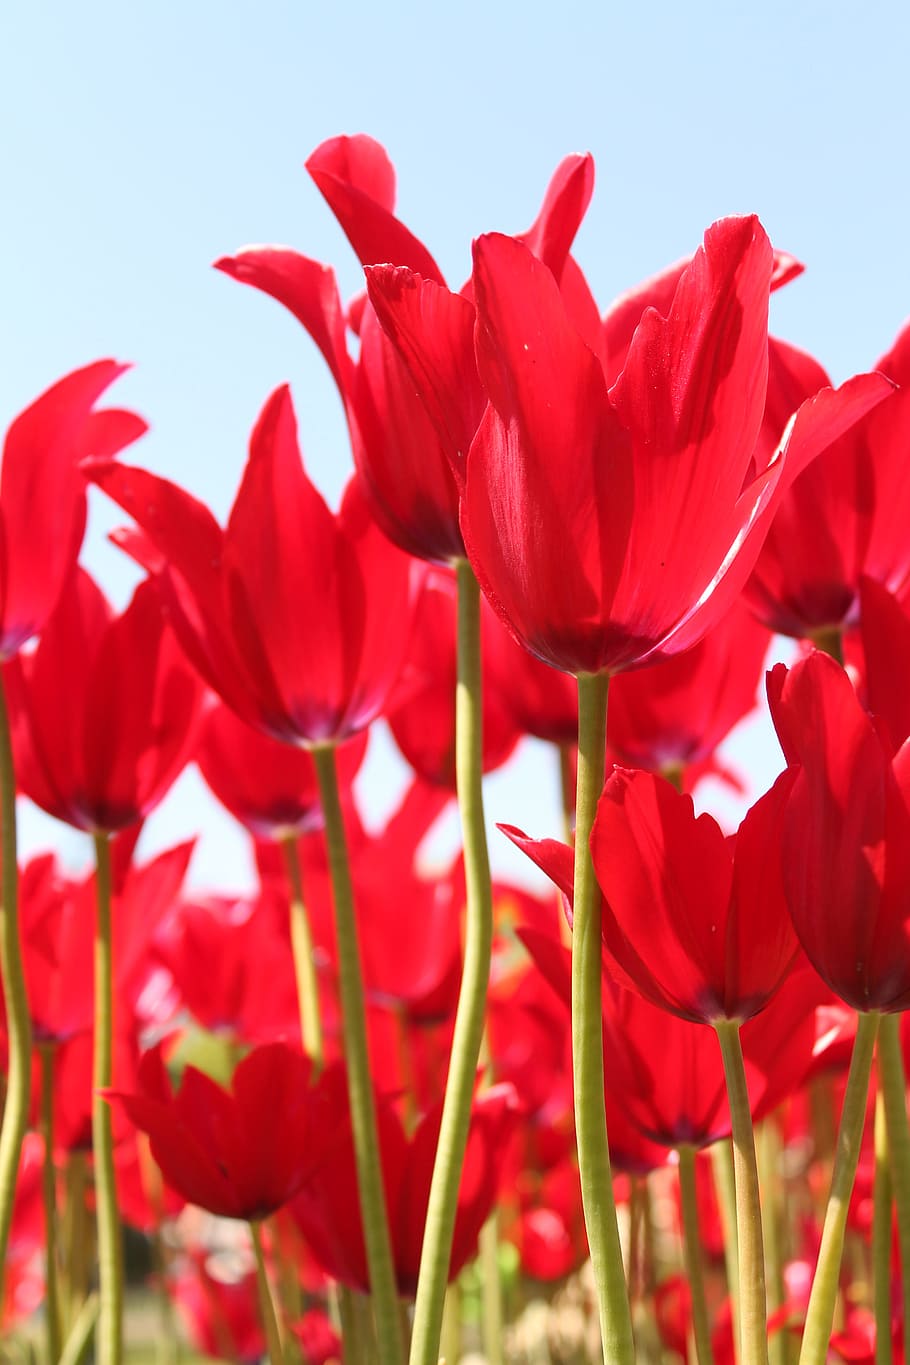 Red Tulip flower festival, farm, blooms, flowering plant, beauty in nature